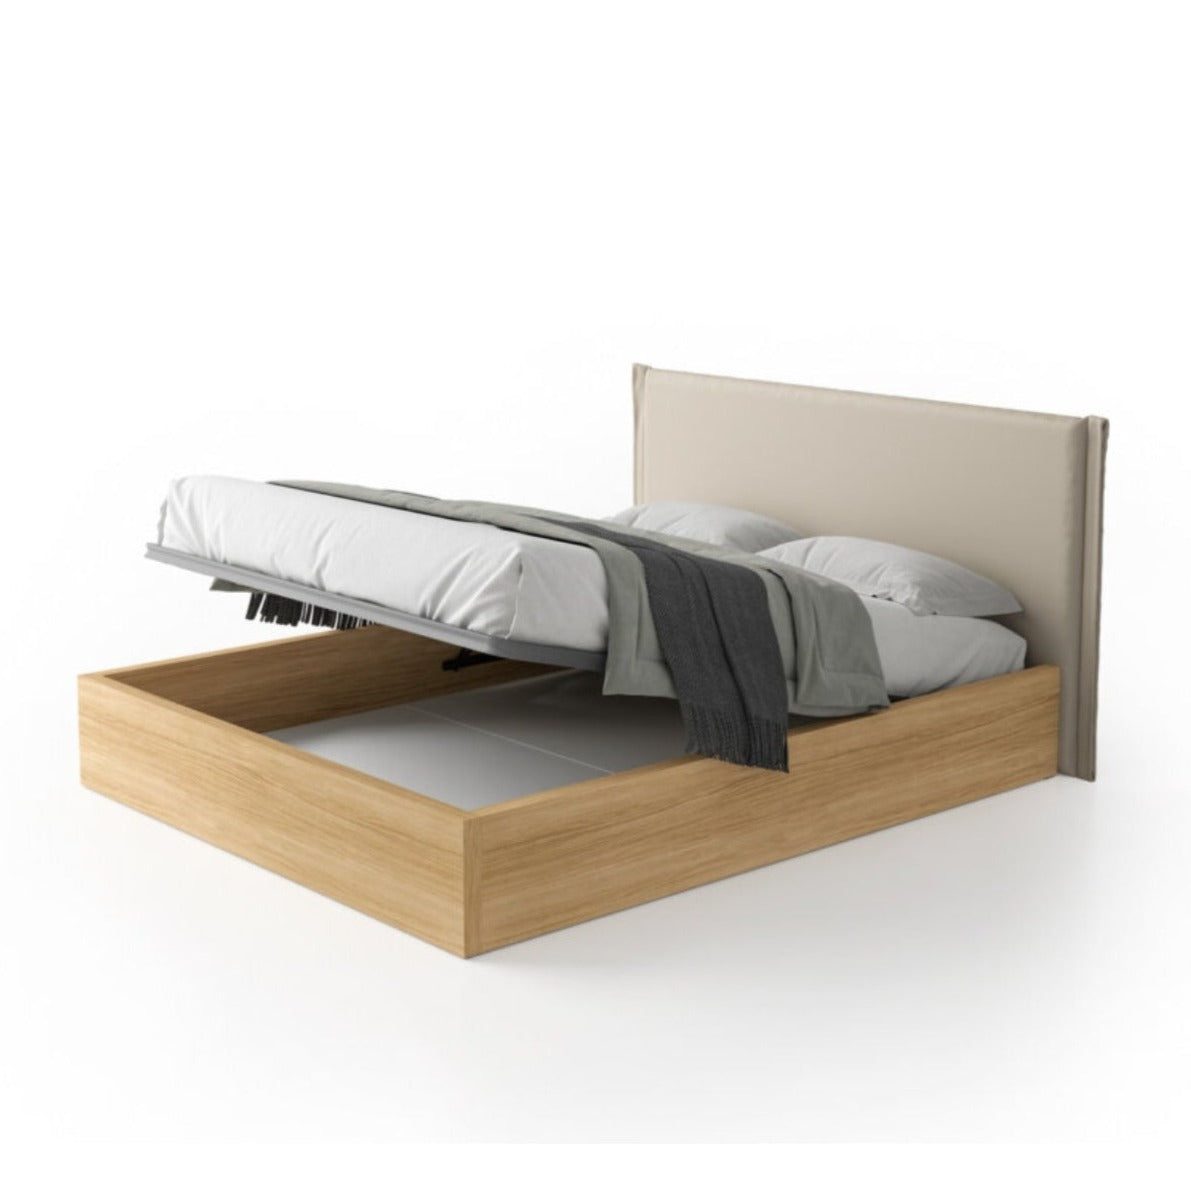 West Upholstered Bed by Santa Lucia